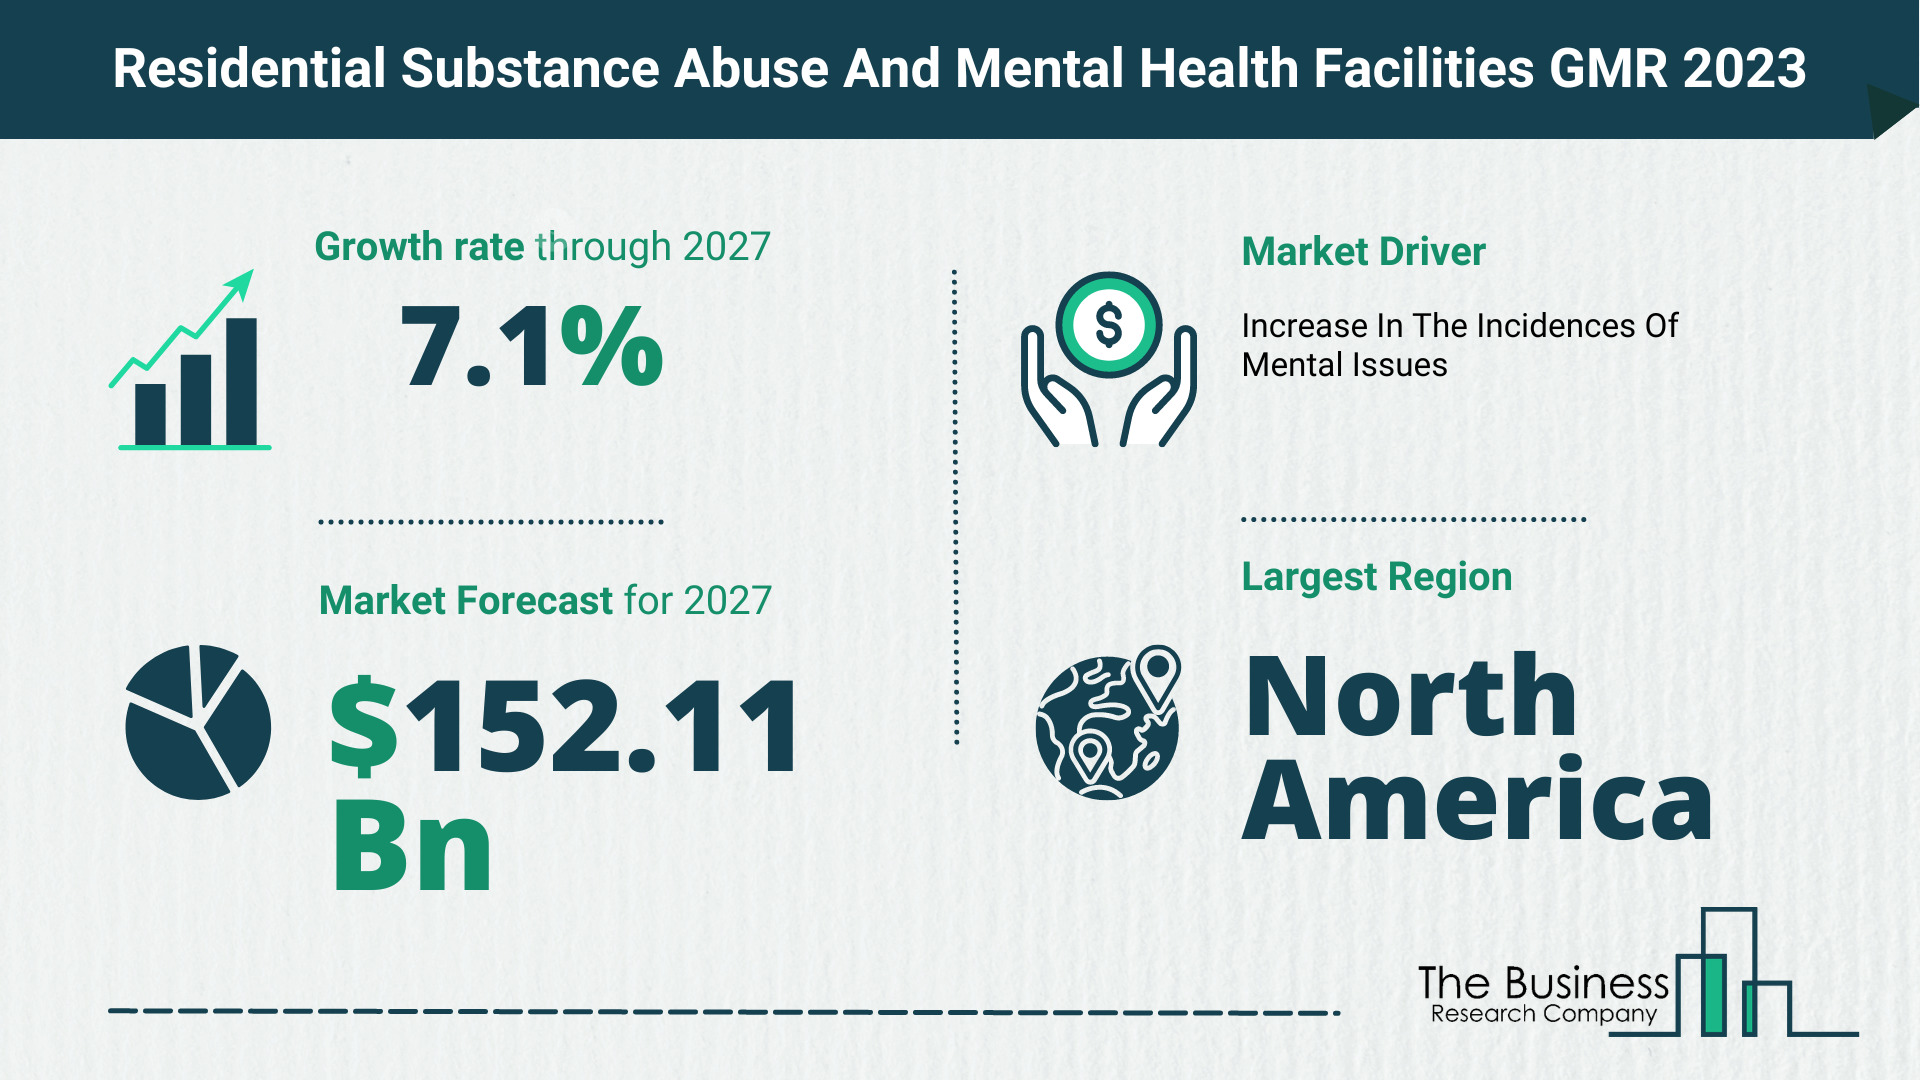 Global Residential Substance Abuse And Mental Health Facilities Market Trends